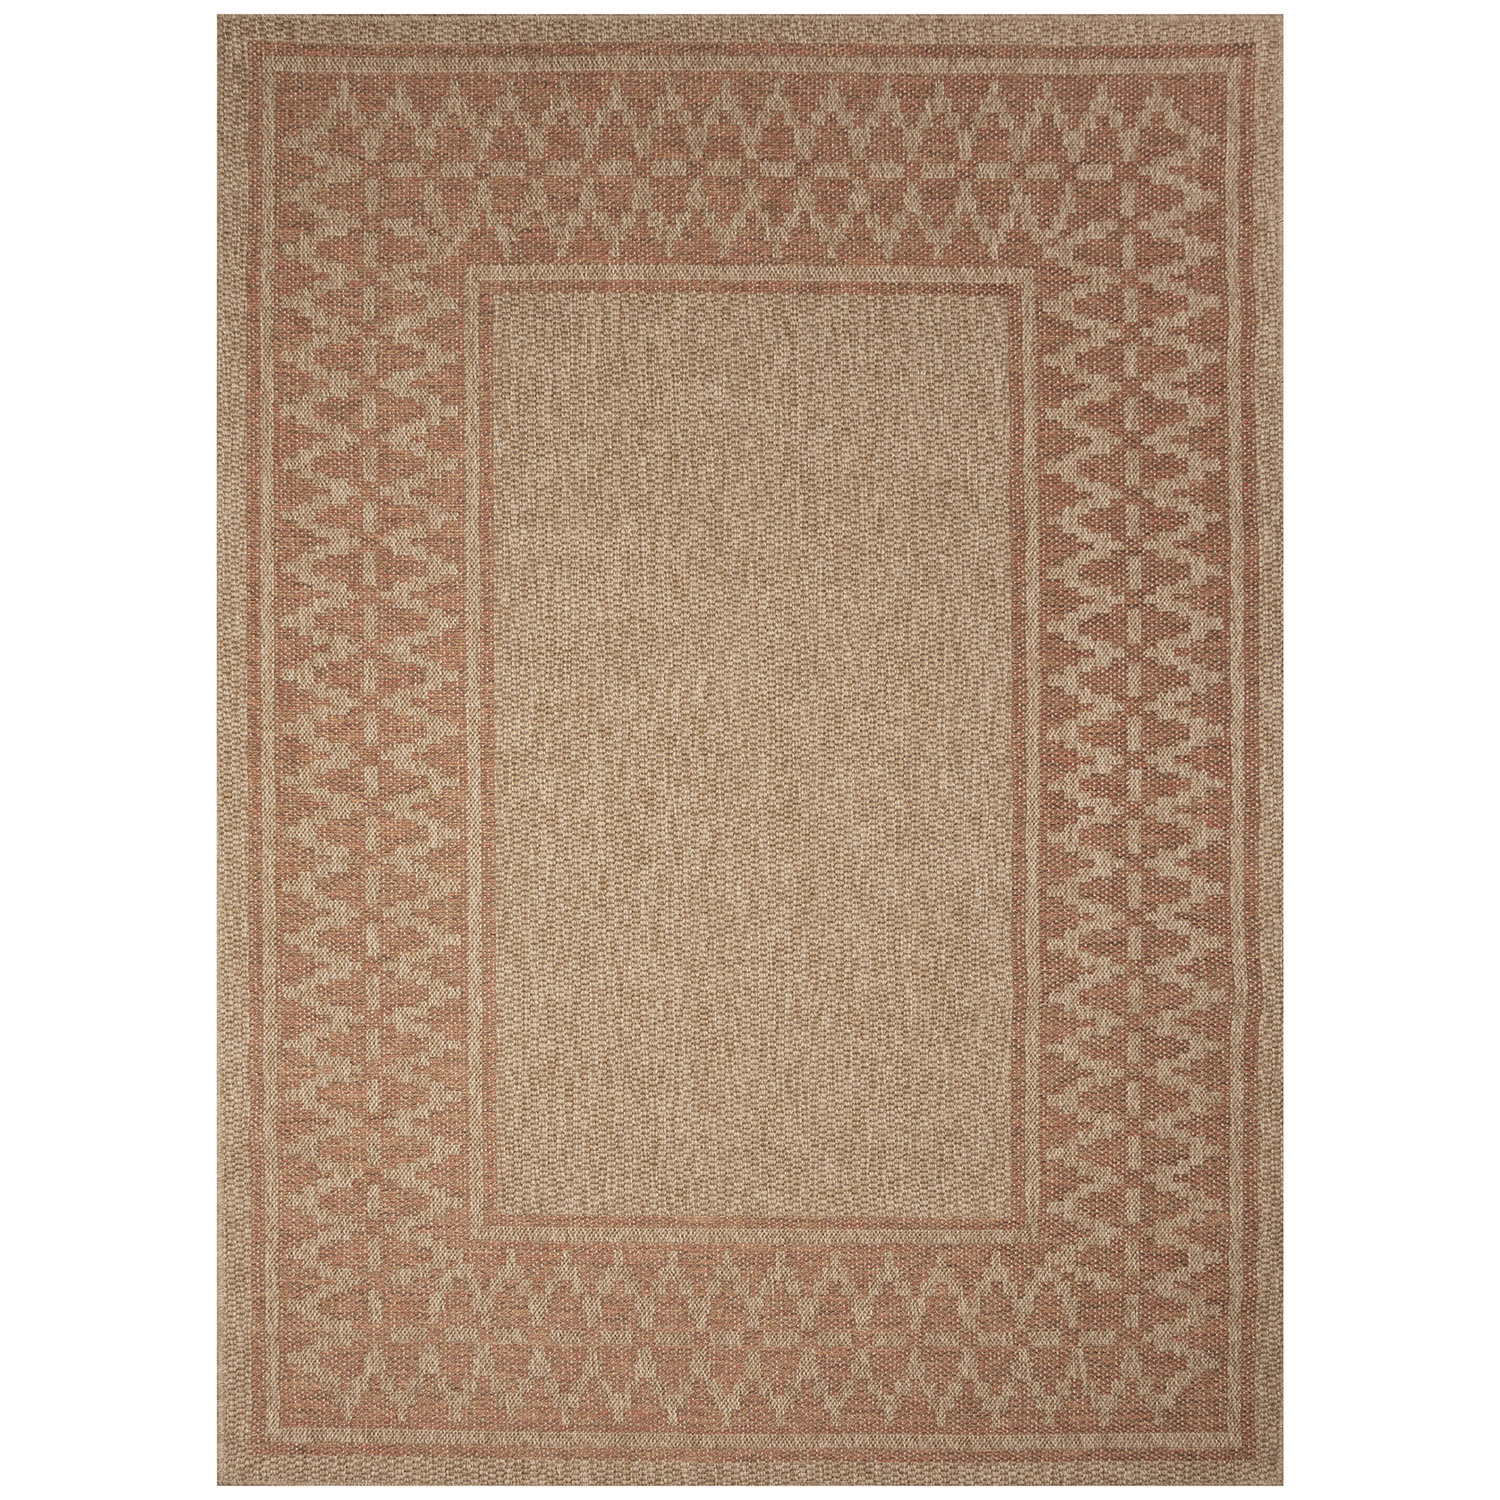 Liora Manne Sahara Low Profile  Easy Care Woven Weather Resistant Rug- Diamond Border Terracotta  Product Image